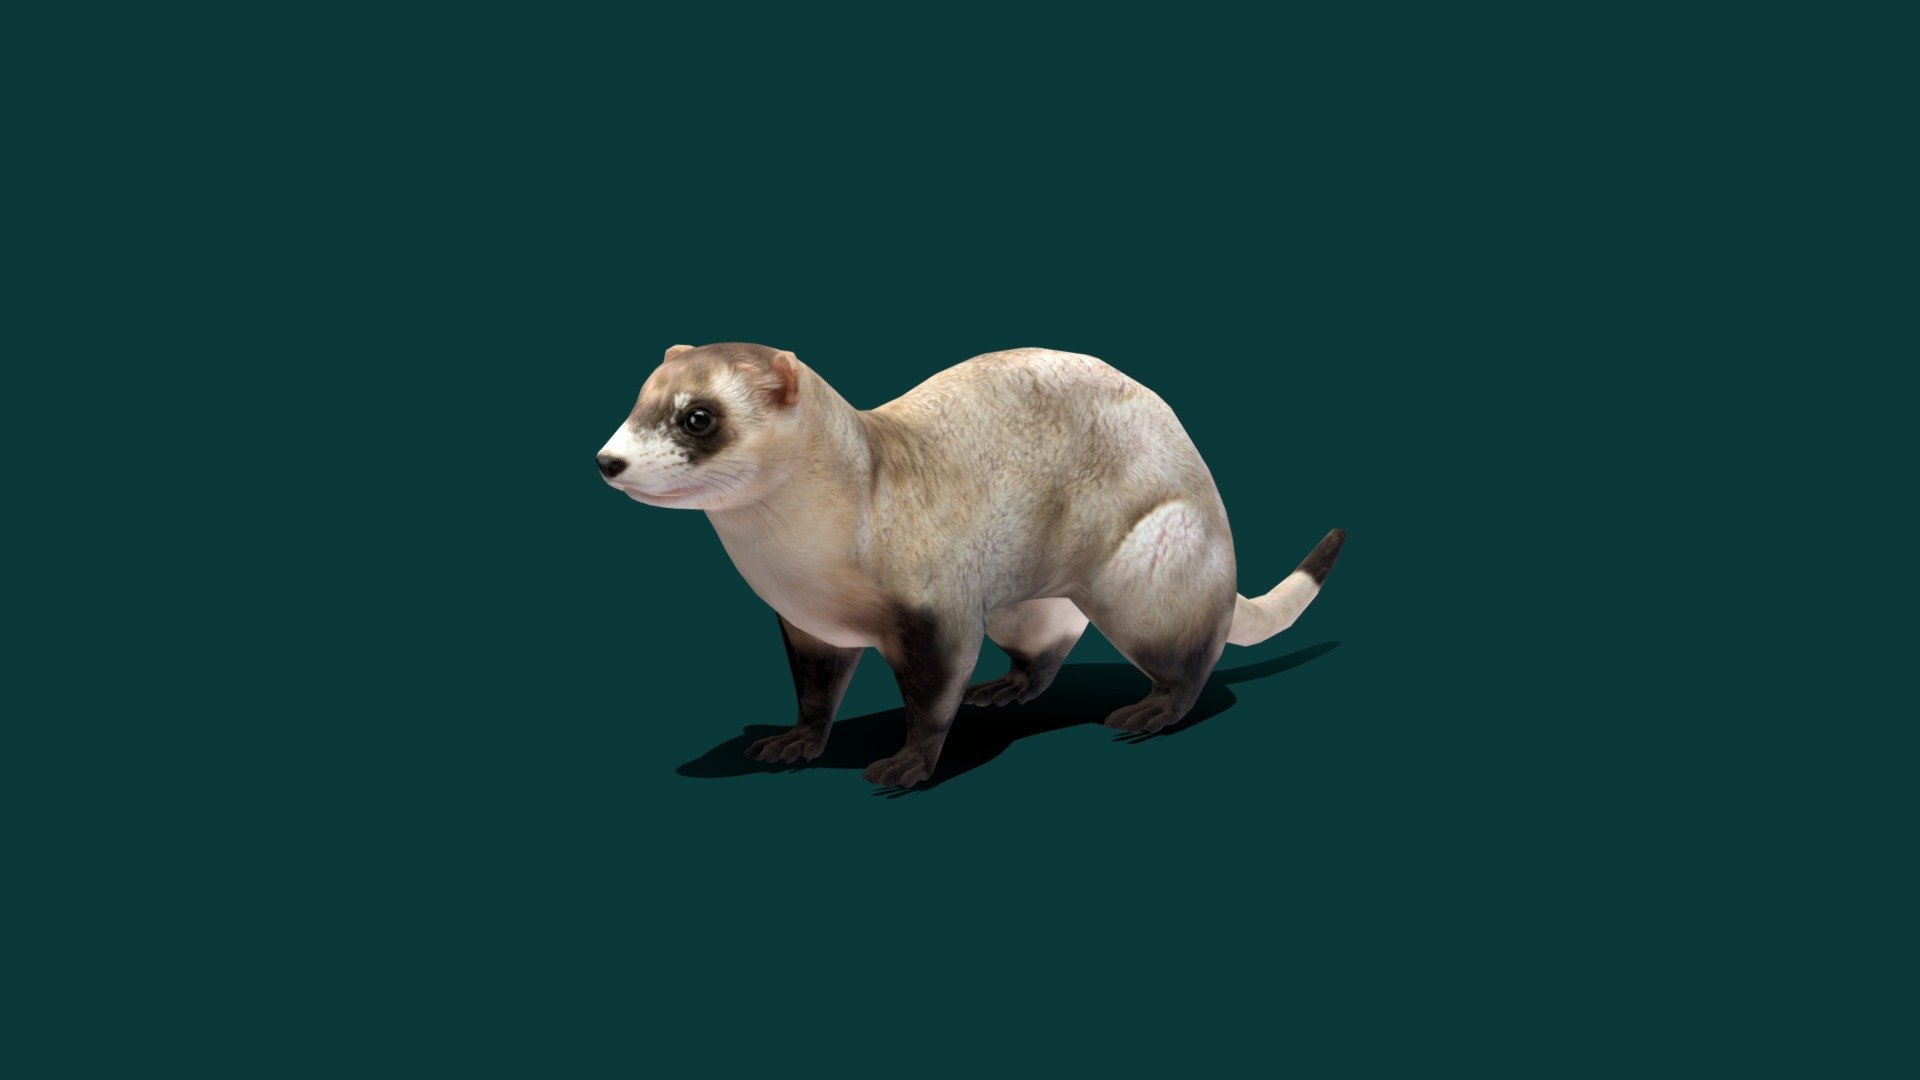 Black-footed Ferret (Endangered) American polecat  

‎Mustela nigripes Mammal  ( Prairie dog hunter  )  Lowpoly

1 Draw Calls

GameReady 

15 Animations

4K PBR Textures Material

Unreal FBX

Unity FBX  

Blend File 

USDZ File (AR Ready). Real Scale Dimension

Textures Files

GLB File

Gltf File ( Spark AR, Lens Studio(SnapChat) , Effector(Tiktok) , Spline, Play Canvas ) Compatible



Triangles : 7552

Vertices  : 3799

Faces     : 3810 

Edges     : 7604

Diffuse , Metallic, Roughness , Normal Map ,Specular Map,AO
The black-footed ferret, also known as the American polecat or prairie dog hunter, is a species of mustelid native to central North America. The black-footed ferret is roughly the size of a mink and is similar in appearance to the European polecat and the Asian steppe polecat. Wikipedia
Conservation status: Endangered (Population increasing) Encyclopedia of Life
Scientific name: Mustela nigripes
Trophic level: Carnivorous Encyclopedia of Life - Black-footed Ferret (Endangered) - 3D model by Nyilonelycompany 3d model